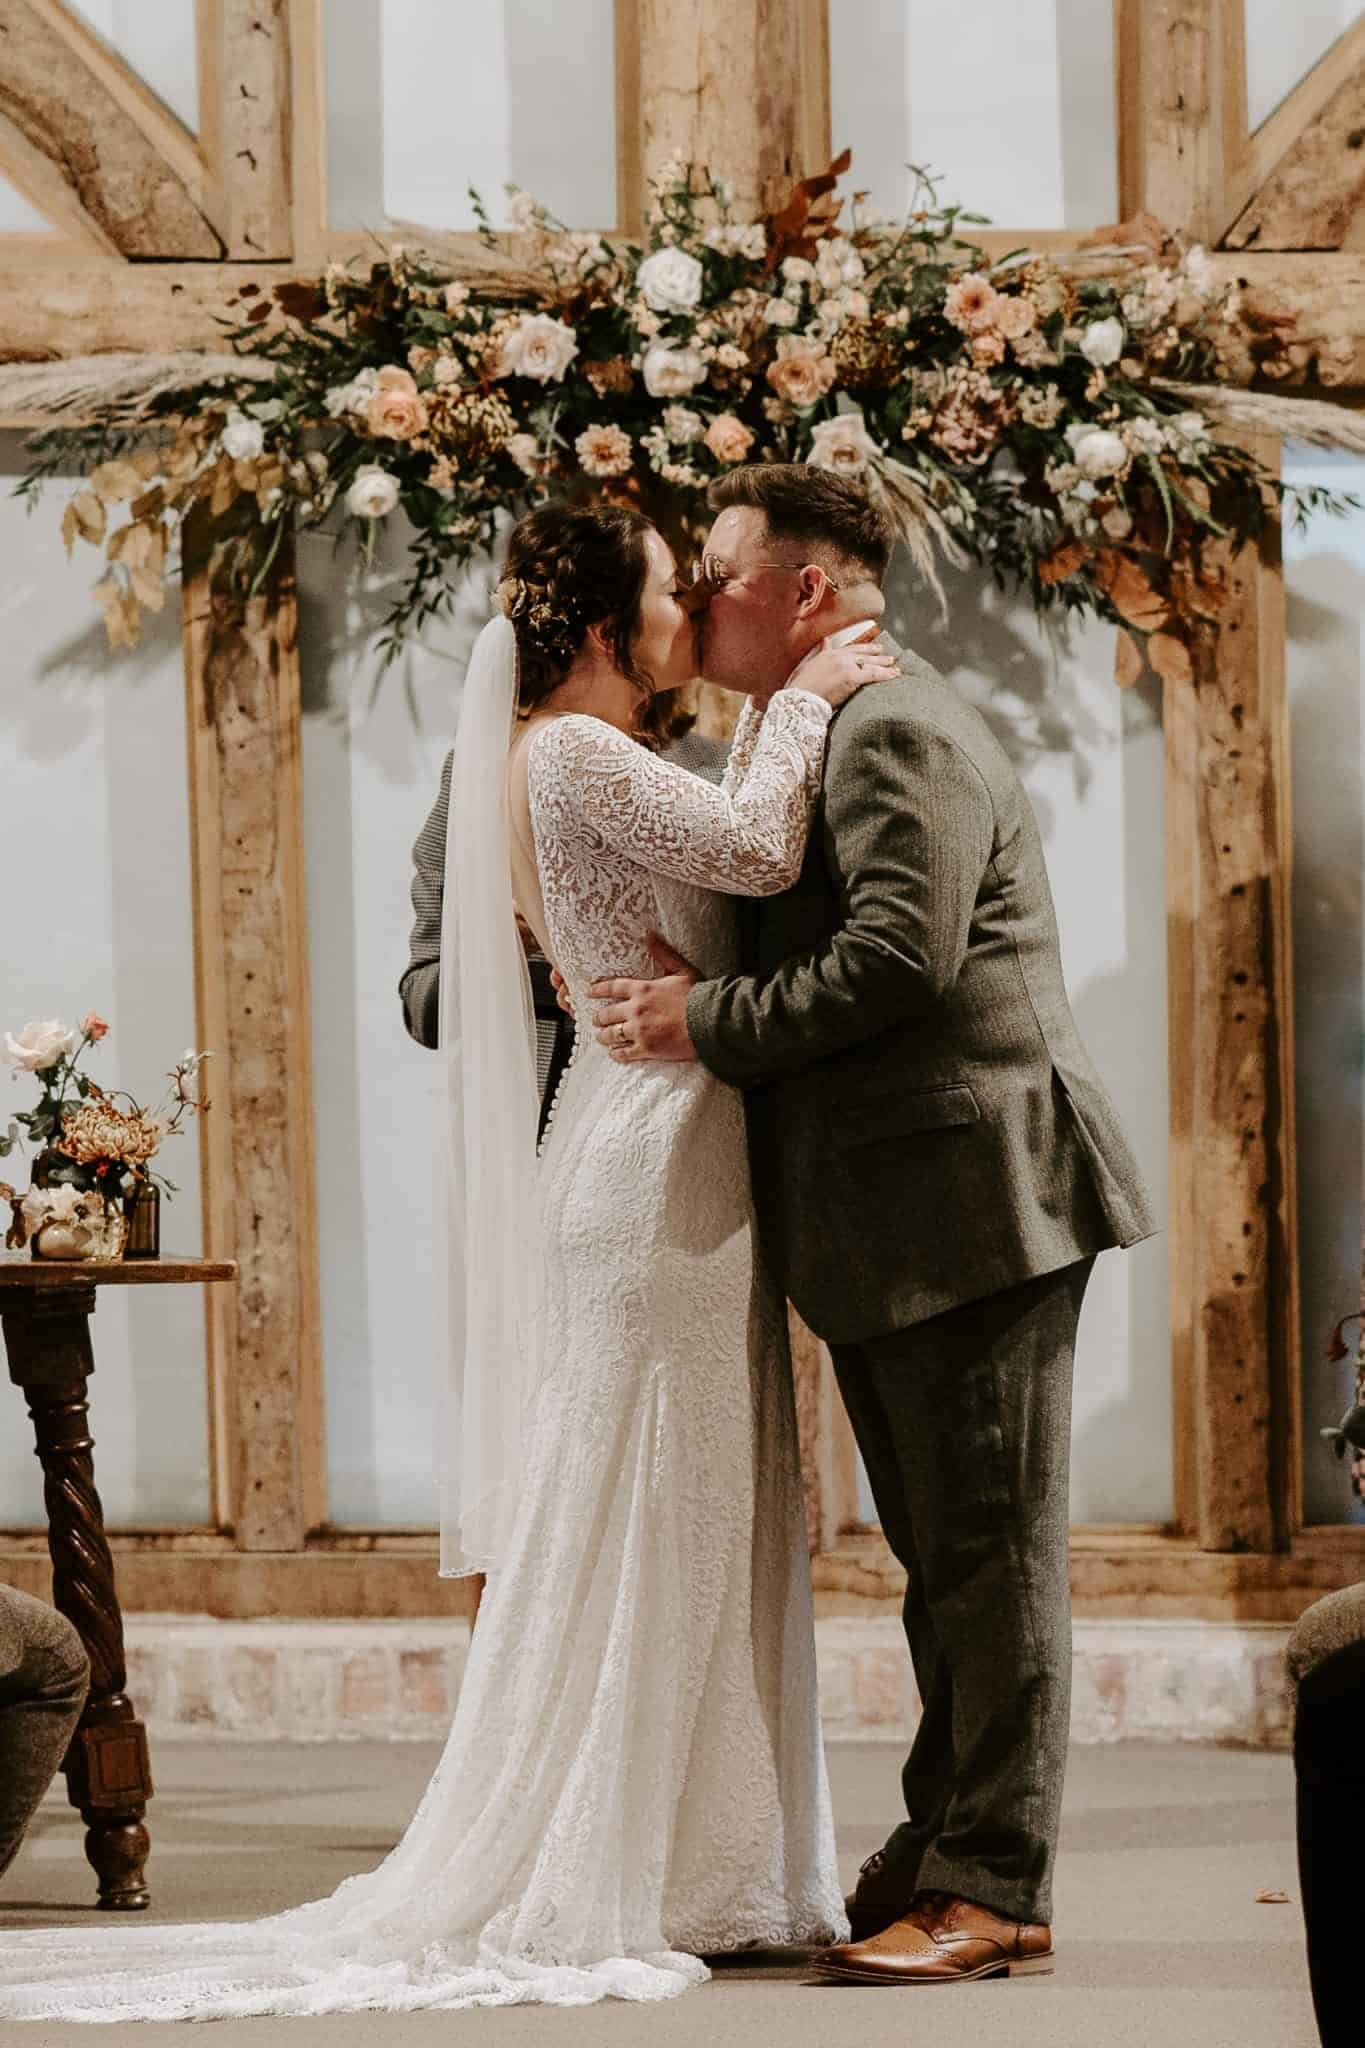 Couple kiss after just marrying in barn wedding ceremony with beautiful autumn flower garland on rustic wooden beams